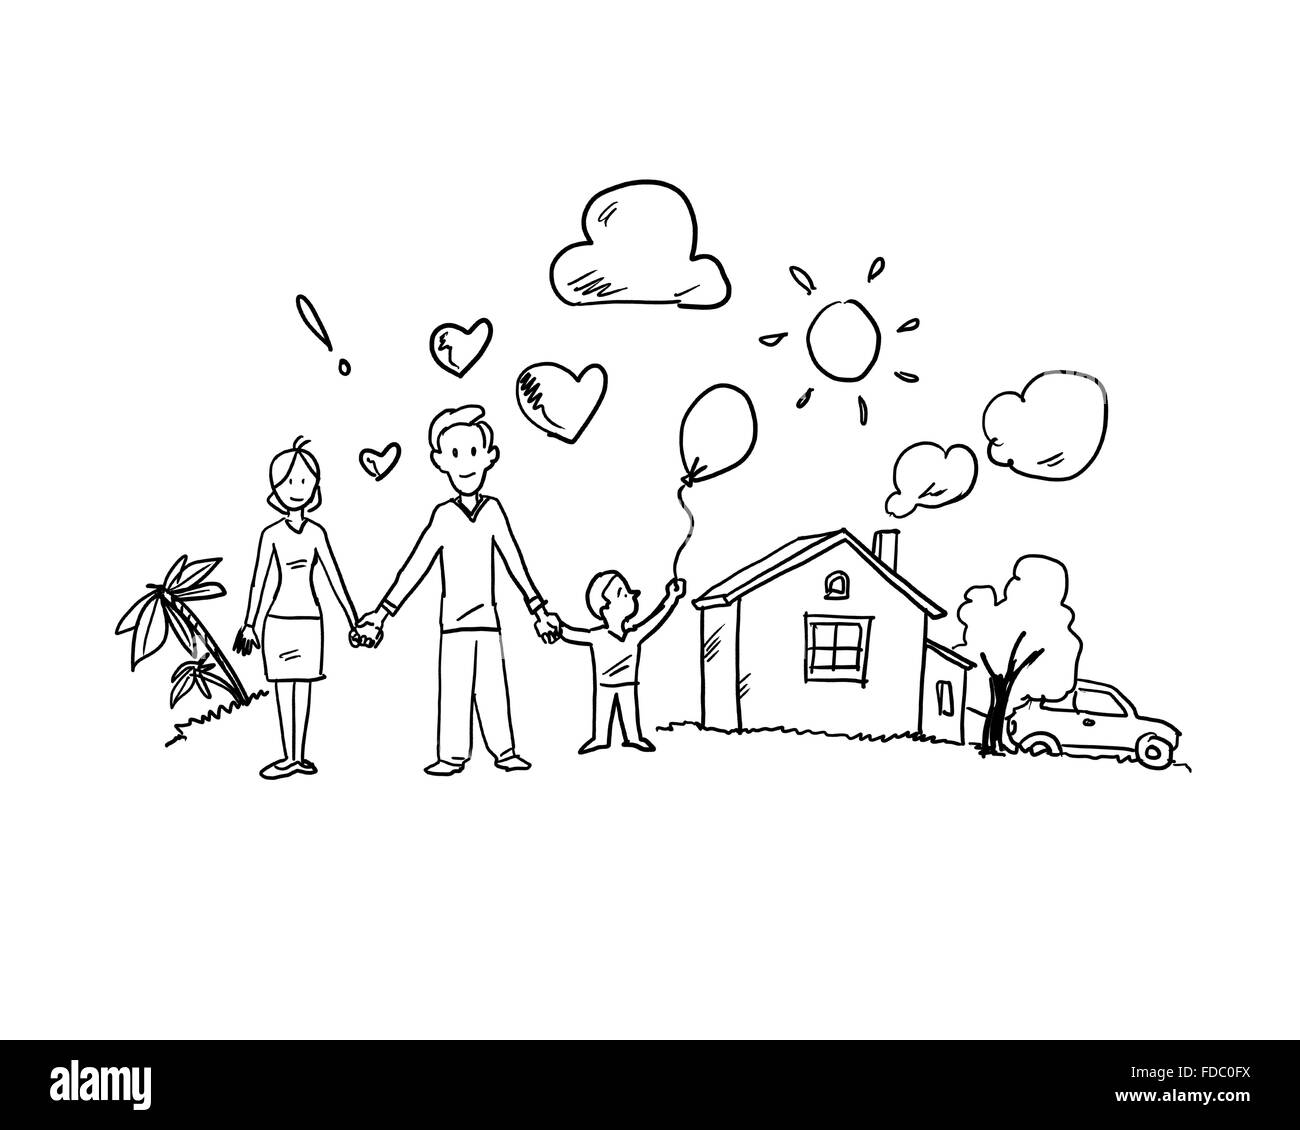 Conceptual sketch image of happy family and other life concepts Stock Photo